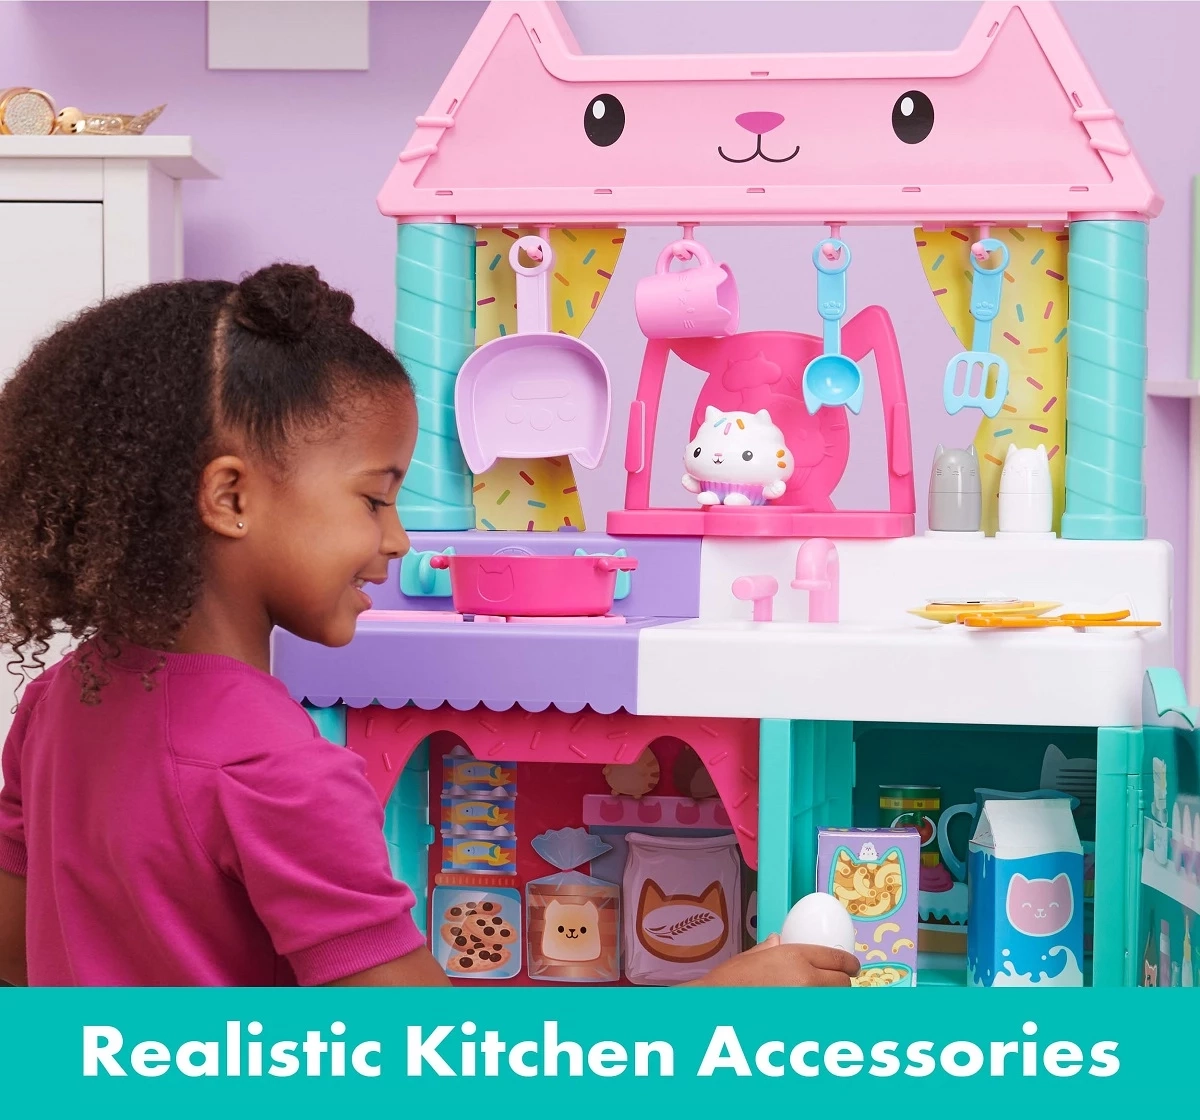 Gabby’S Dollhouse, Cakey Kitchen Set For Kids With Play Kitchen Accessories, Play Food, Sounds, Music And Kids Toys For Girls And Boys Ages 3 And Up